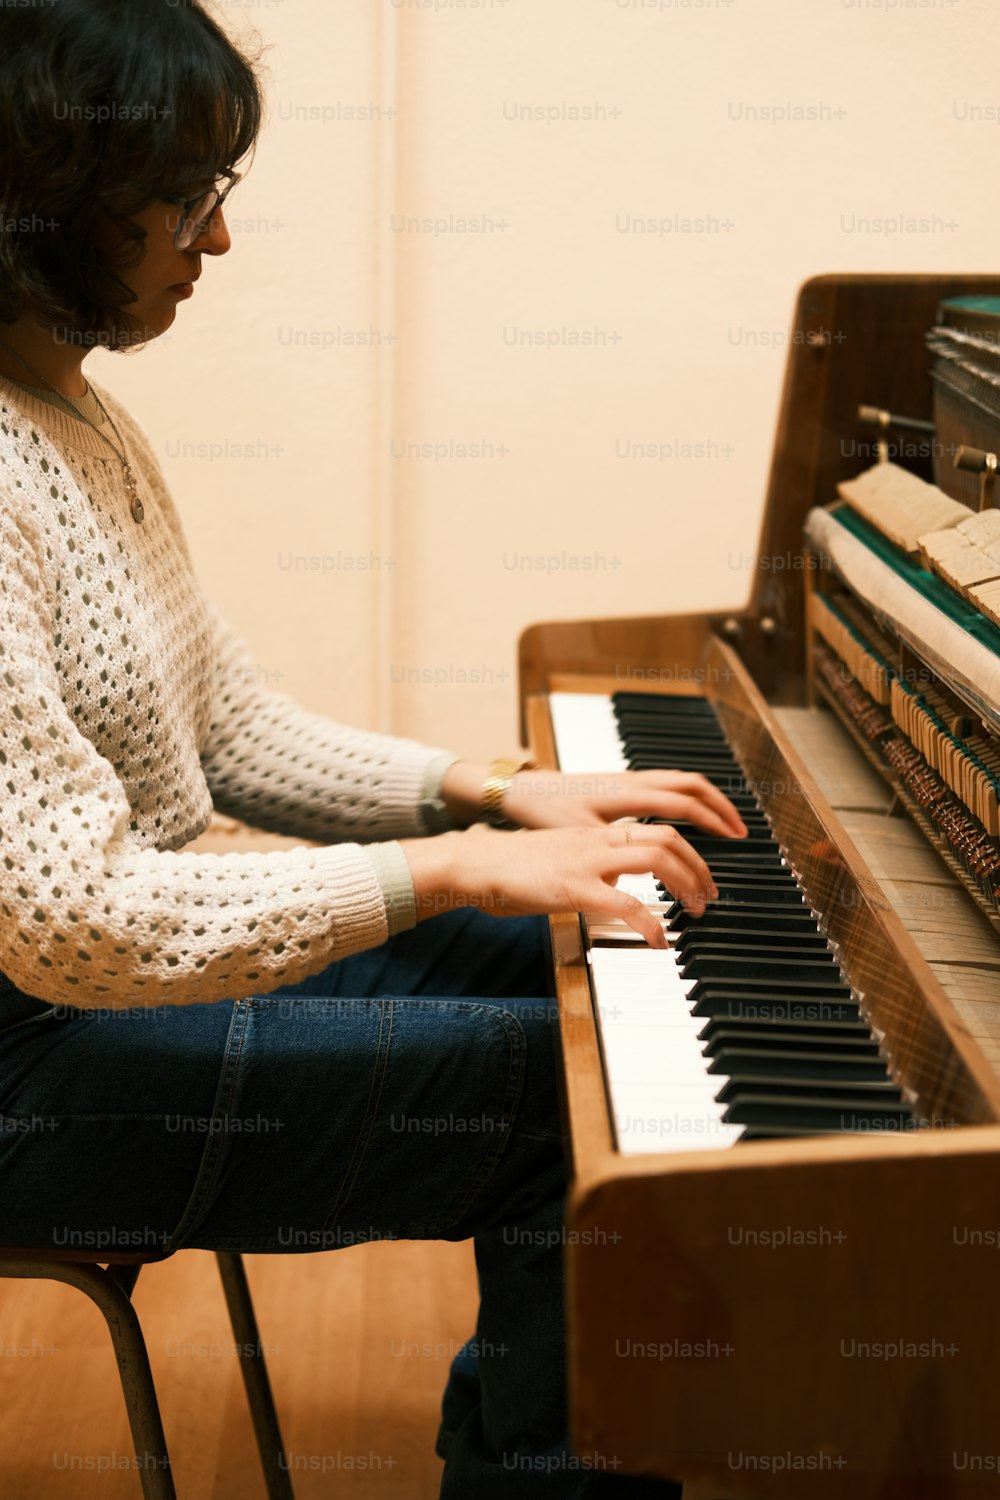 a woman sitting at a piano playing a musical instrument